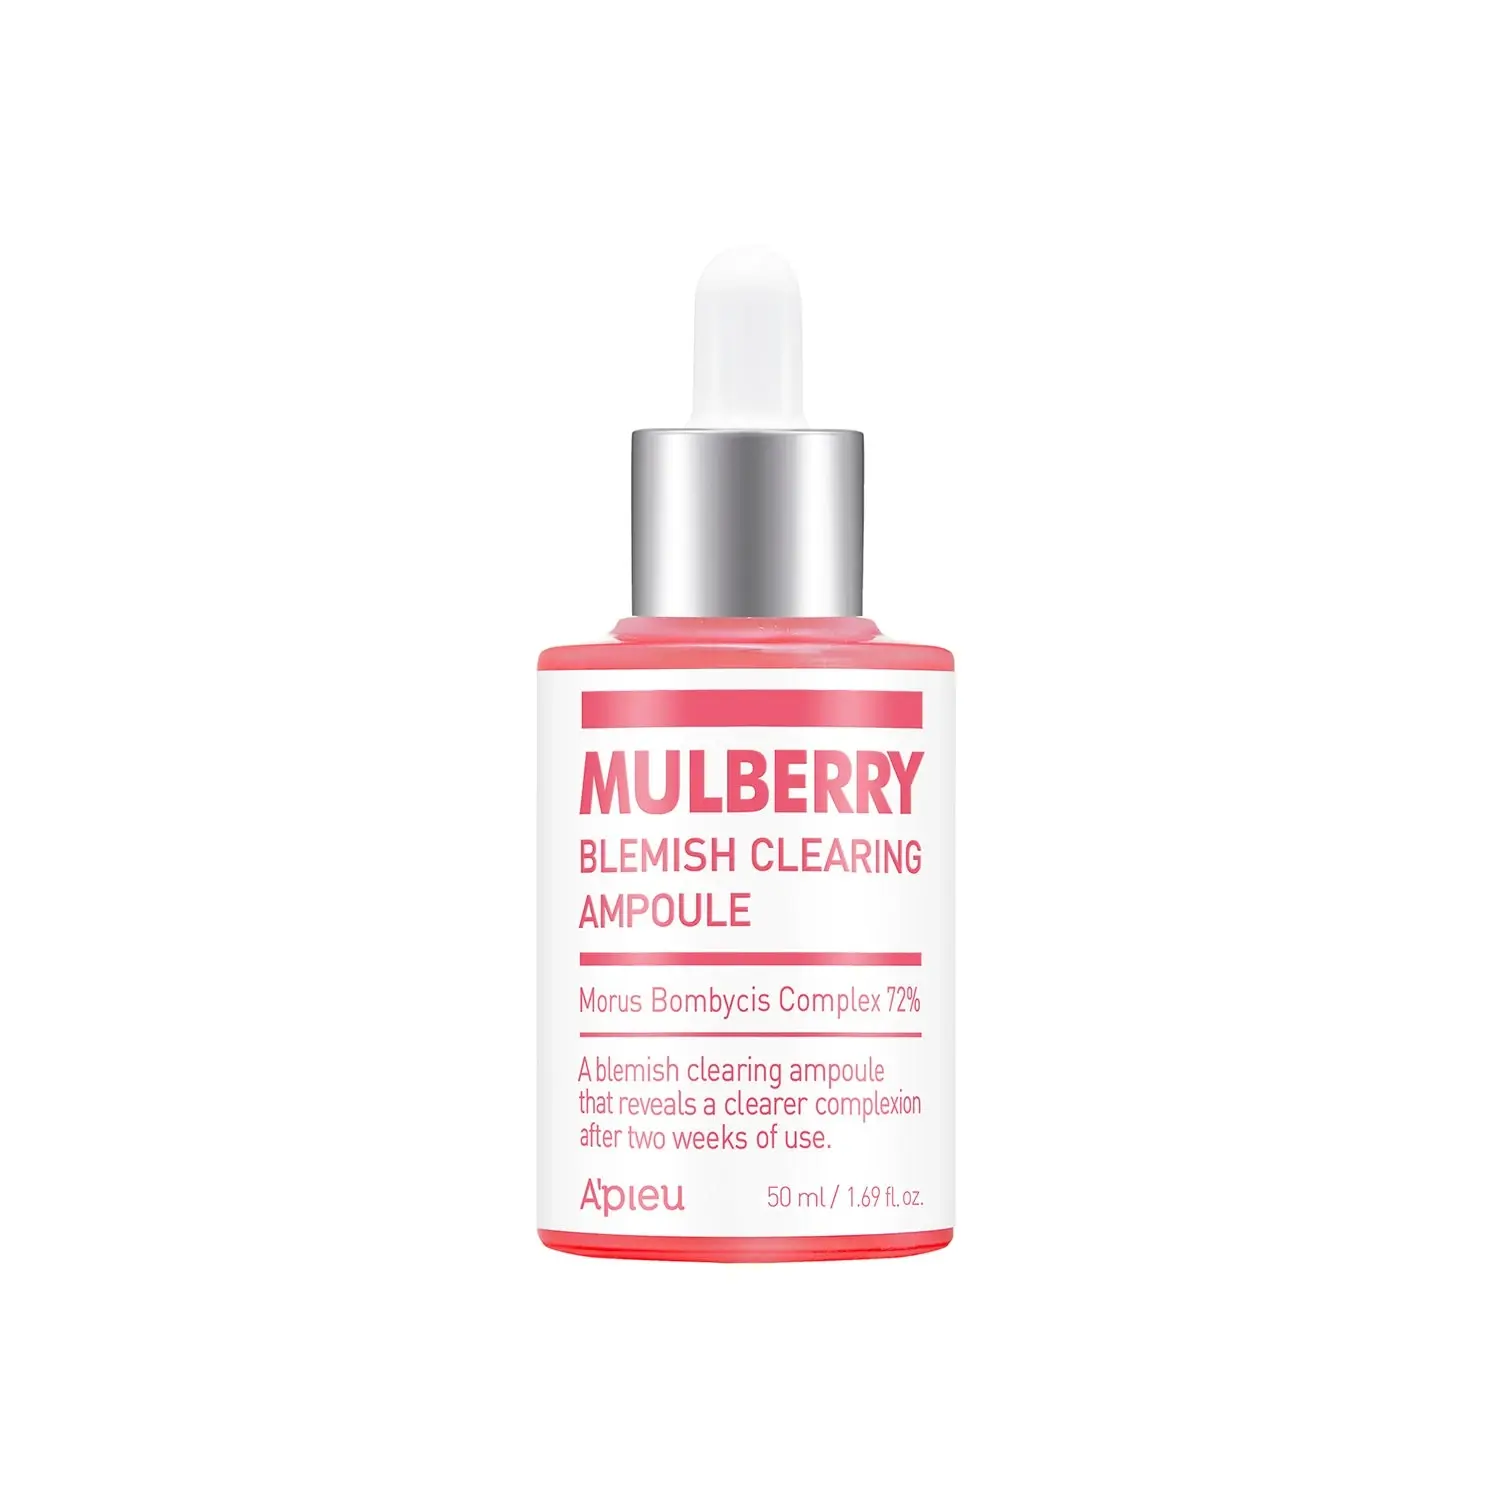 A`pieu Mulberry Blemish Clearing Ampoule